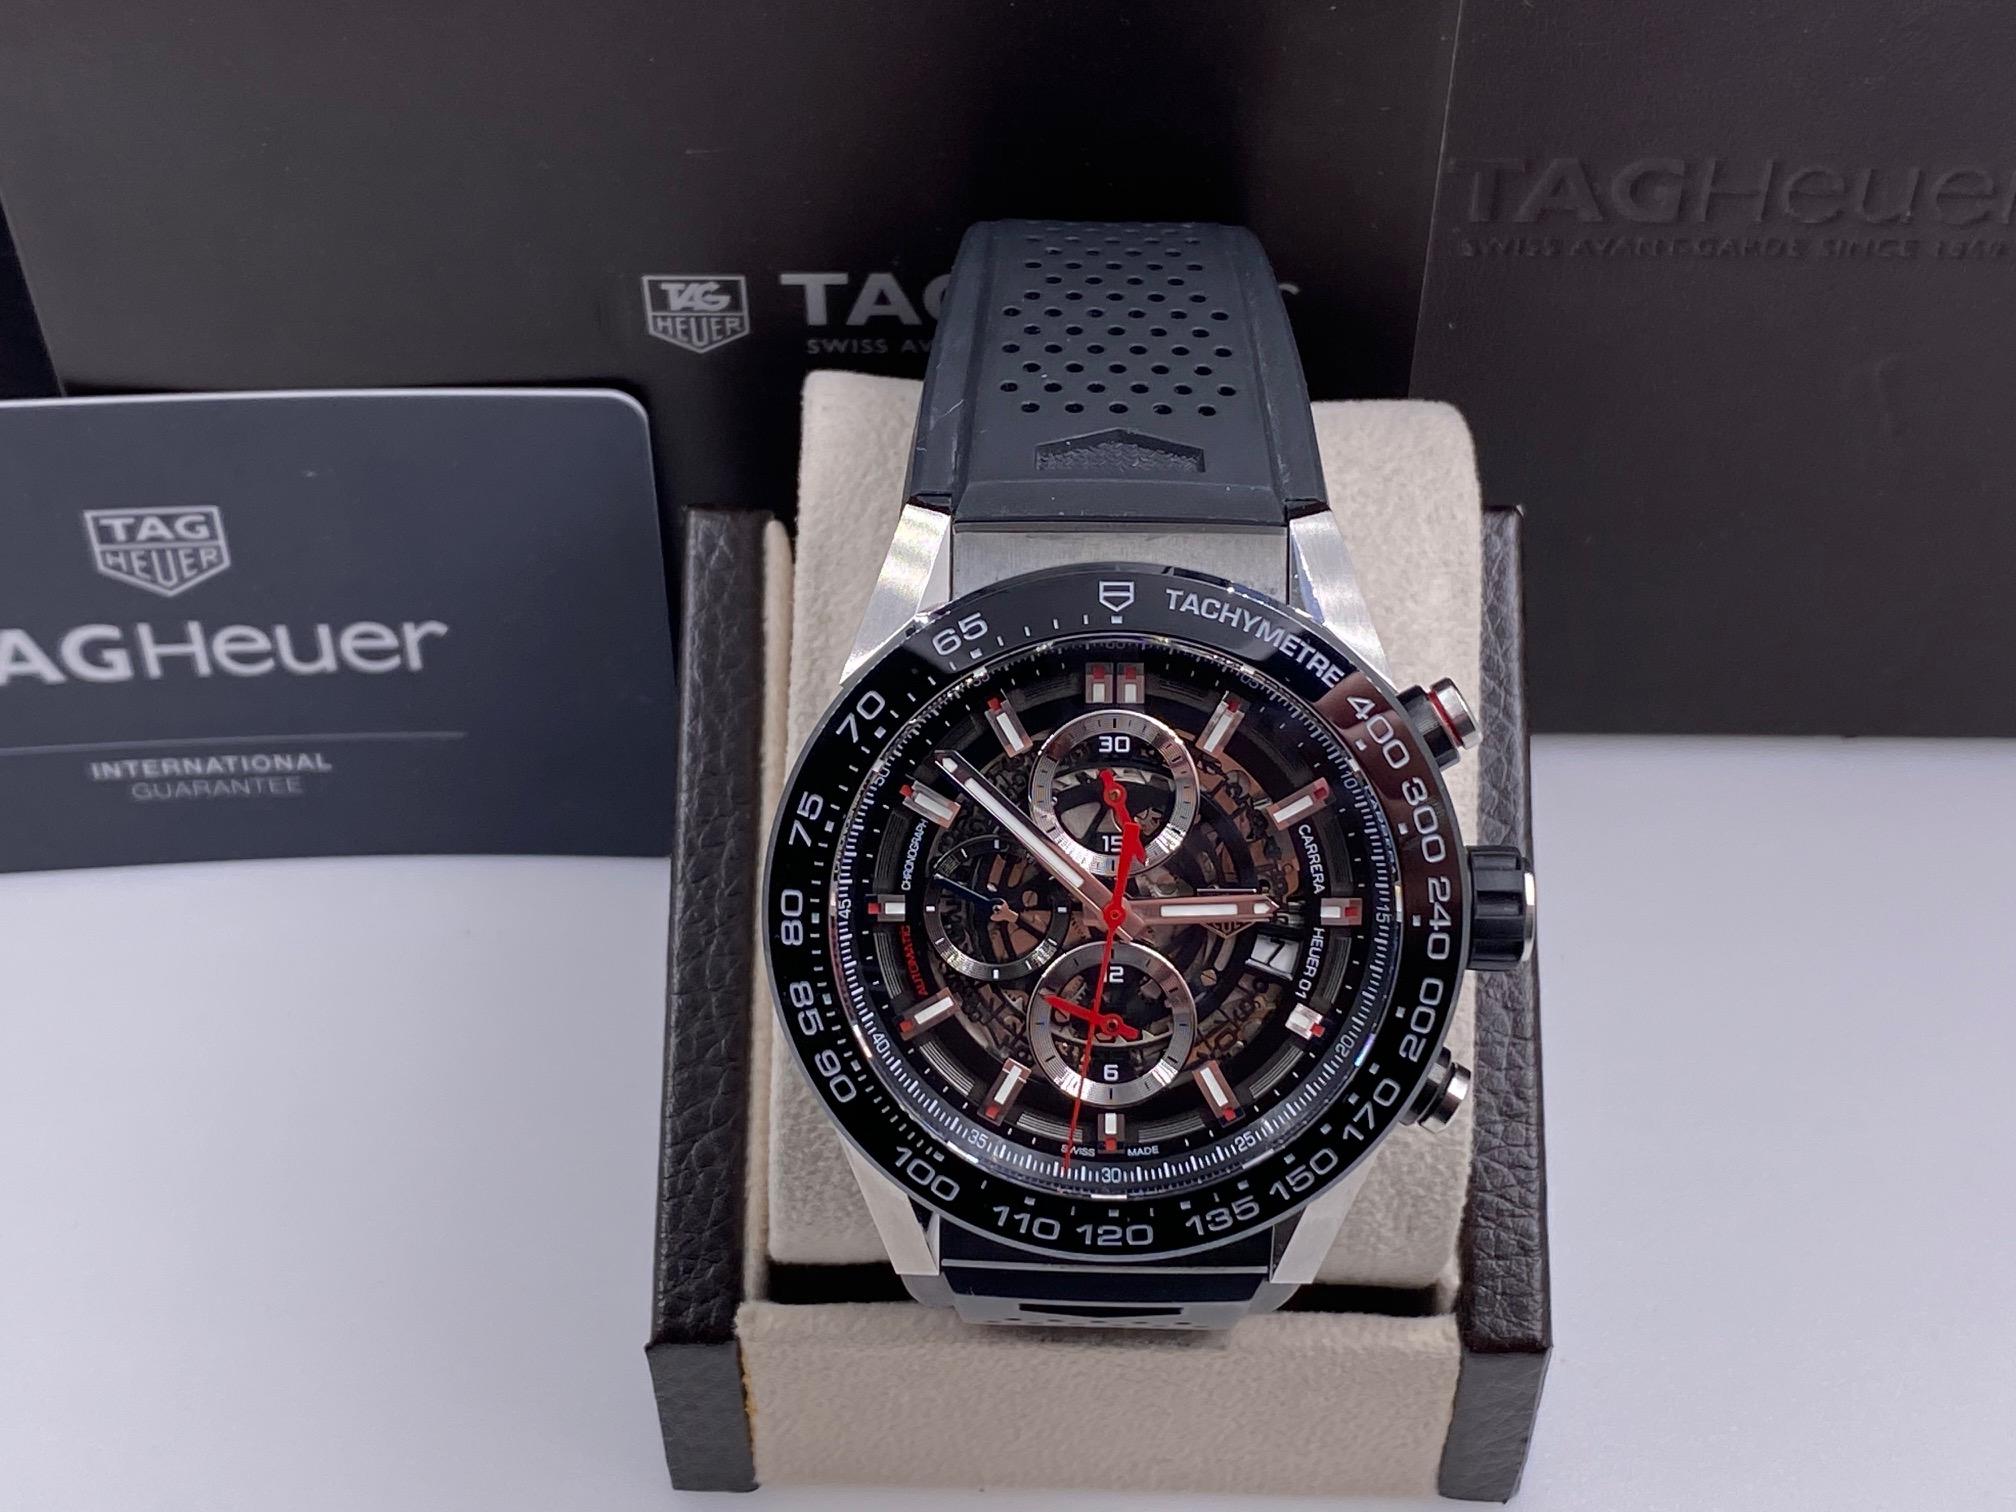 Style Number: CAR2A1Z

 

Model: Carrera Chronograph Heuer 1 

 

Case Material: Titanium and Stainless Steel

 

Band: Rubber

 

Bezel:  Black Titanium Carbide Coated Stainless Steel Bezel 

 

Dial: Black

 

Face: Sapphire Crystal

 

Case Size: